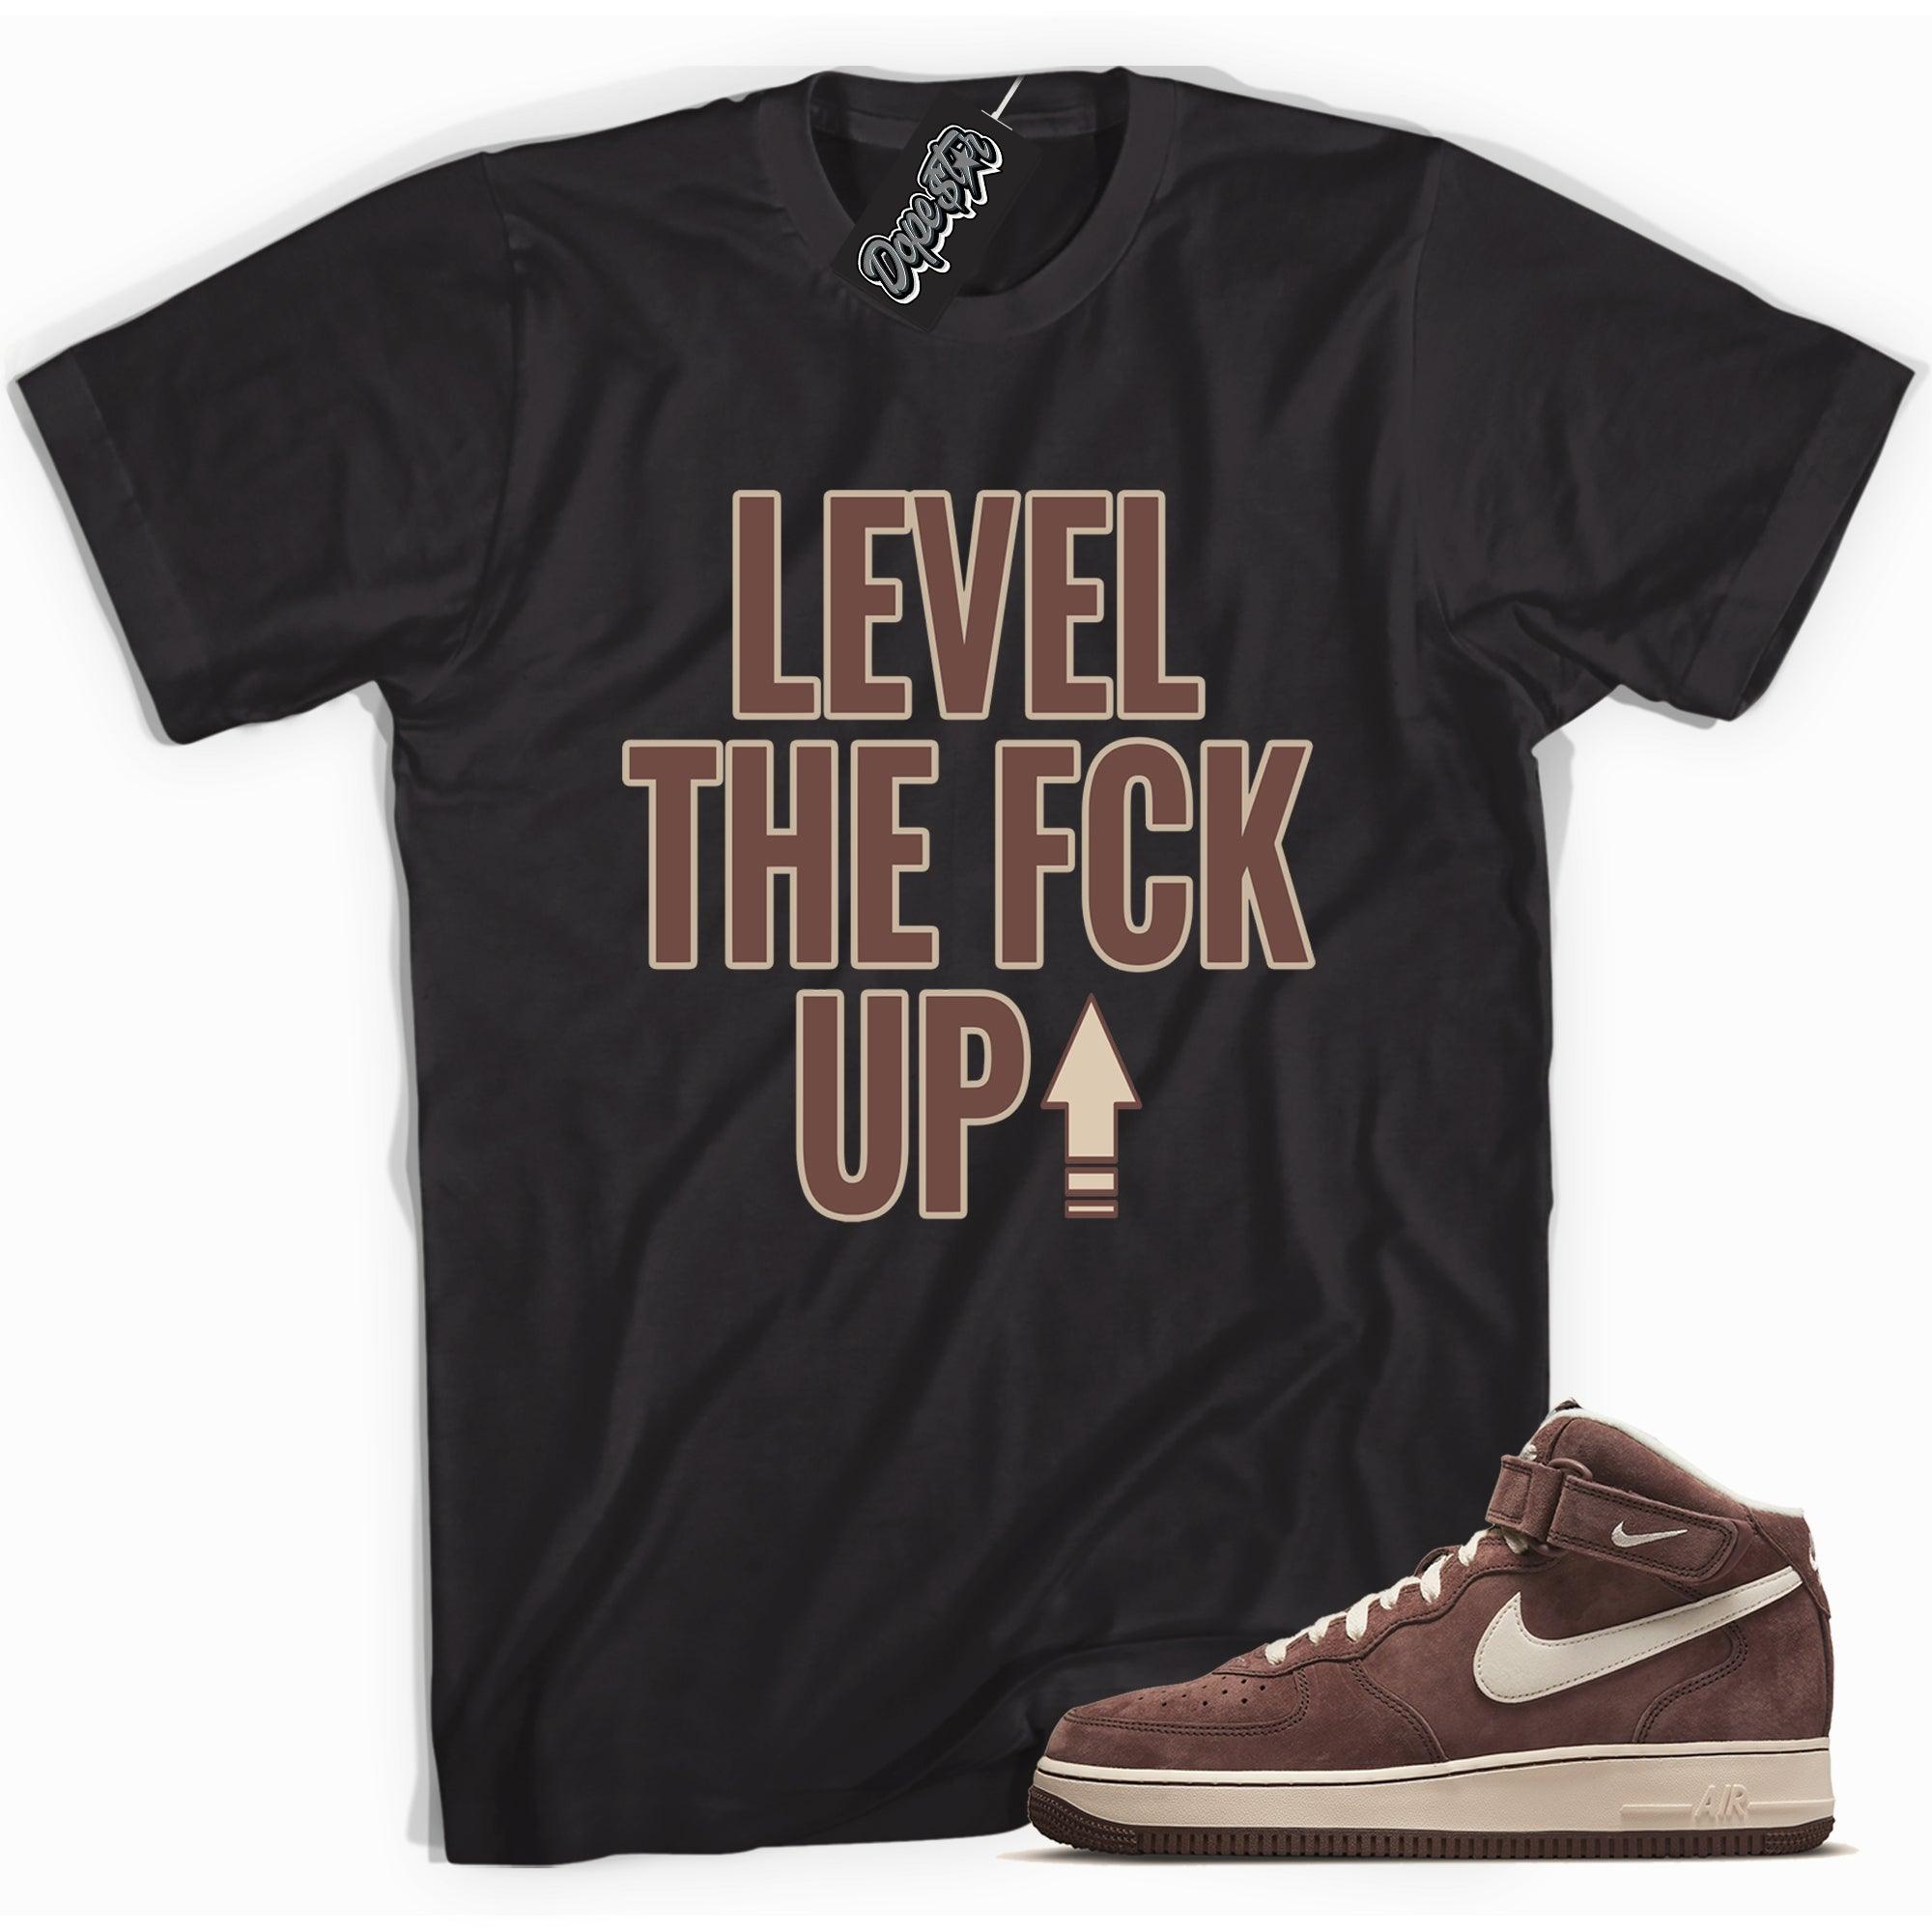 Cool black graphic tee with 'Level Up' print, that perfectly matches Nike Air Force 1 Mid QS Chocolate sneakers.